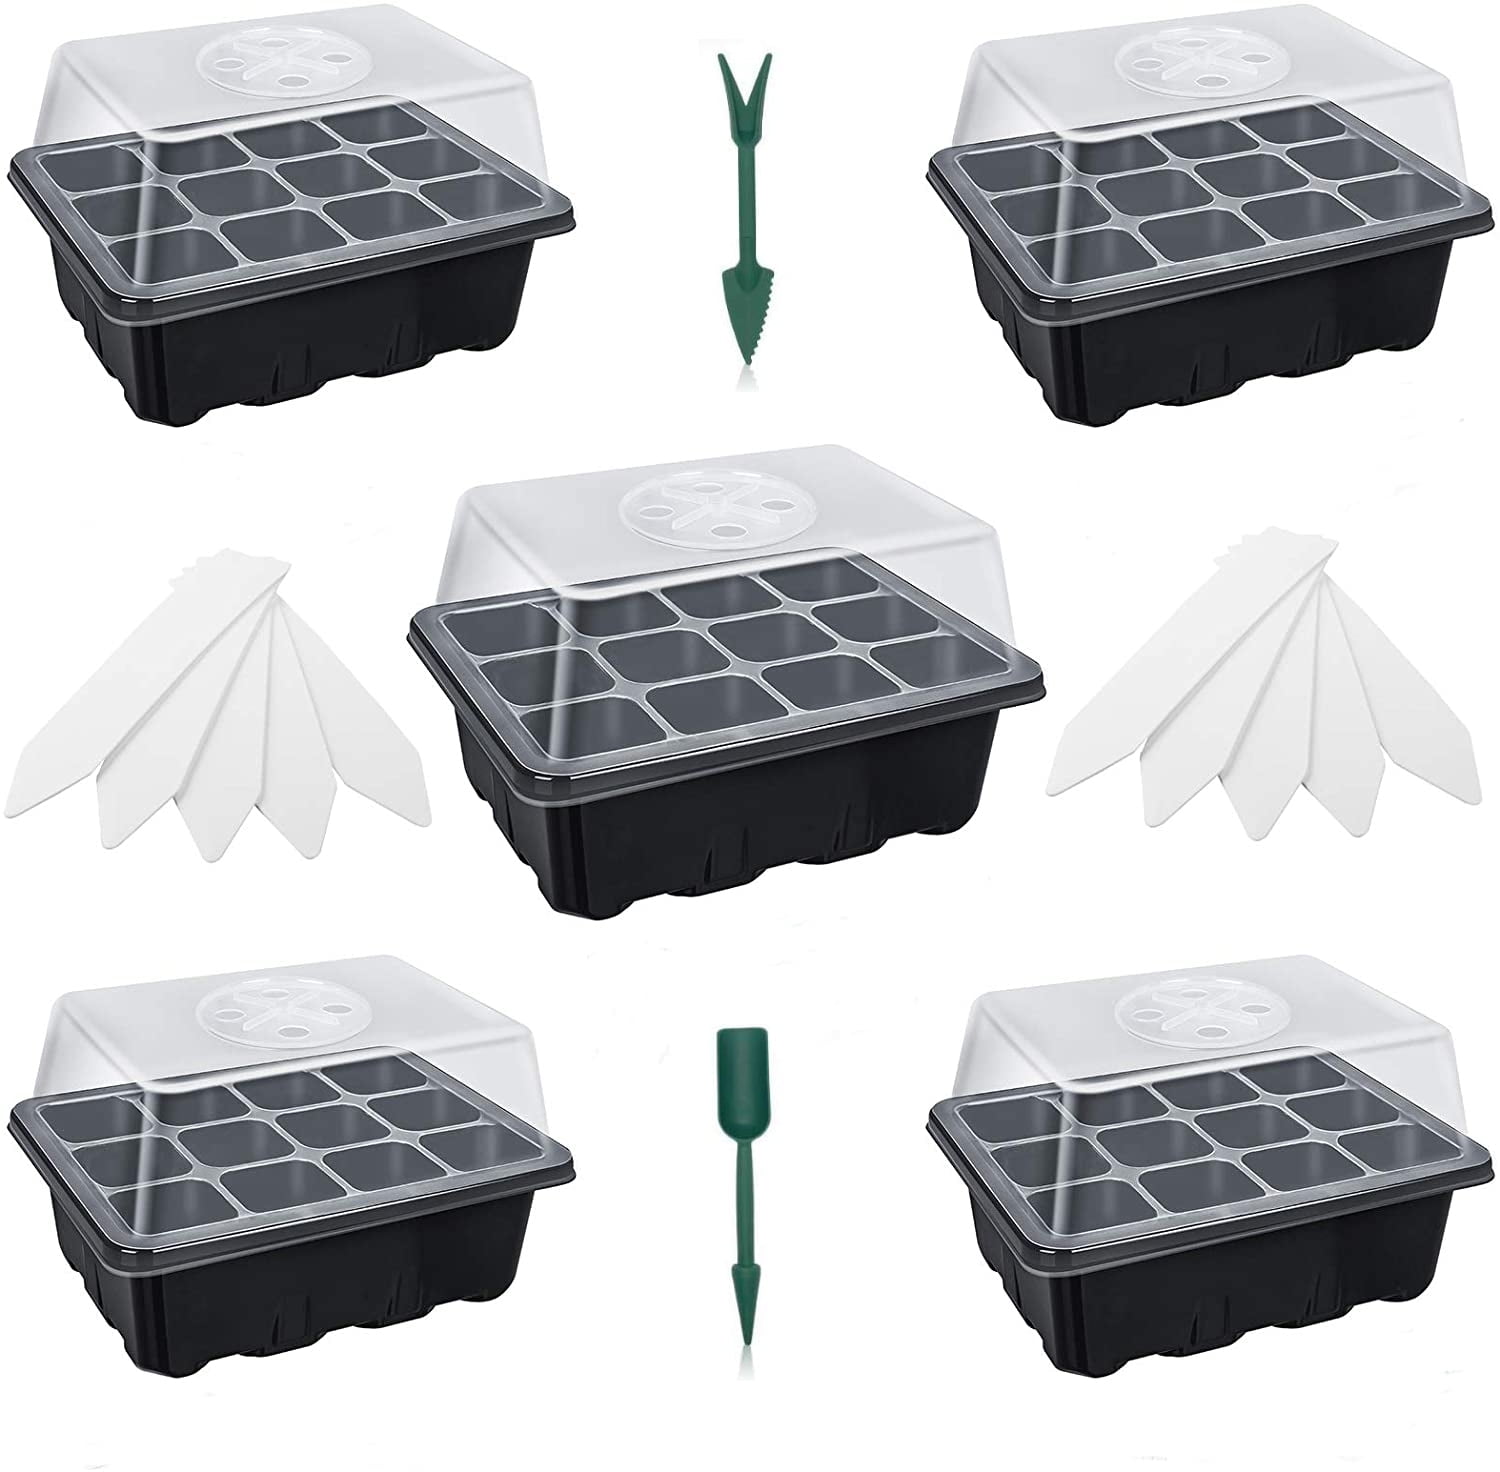 Humidity Dome, Germination Kit with LED Grow Light Bars, 5x8 Cell Tray